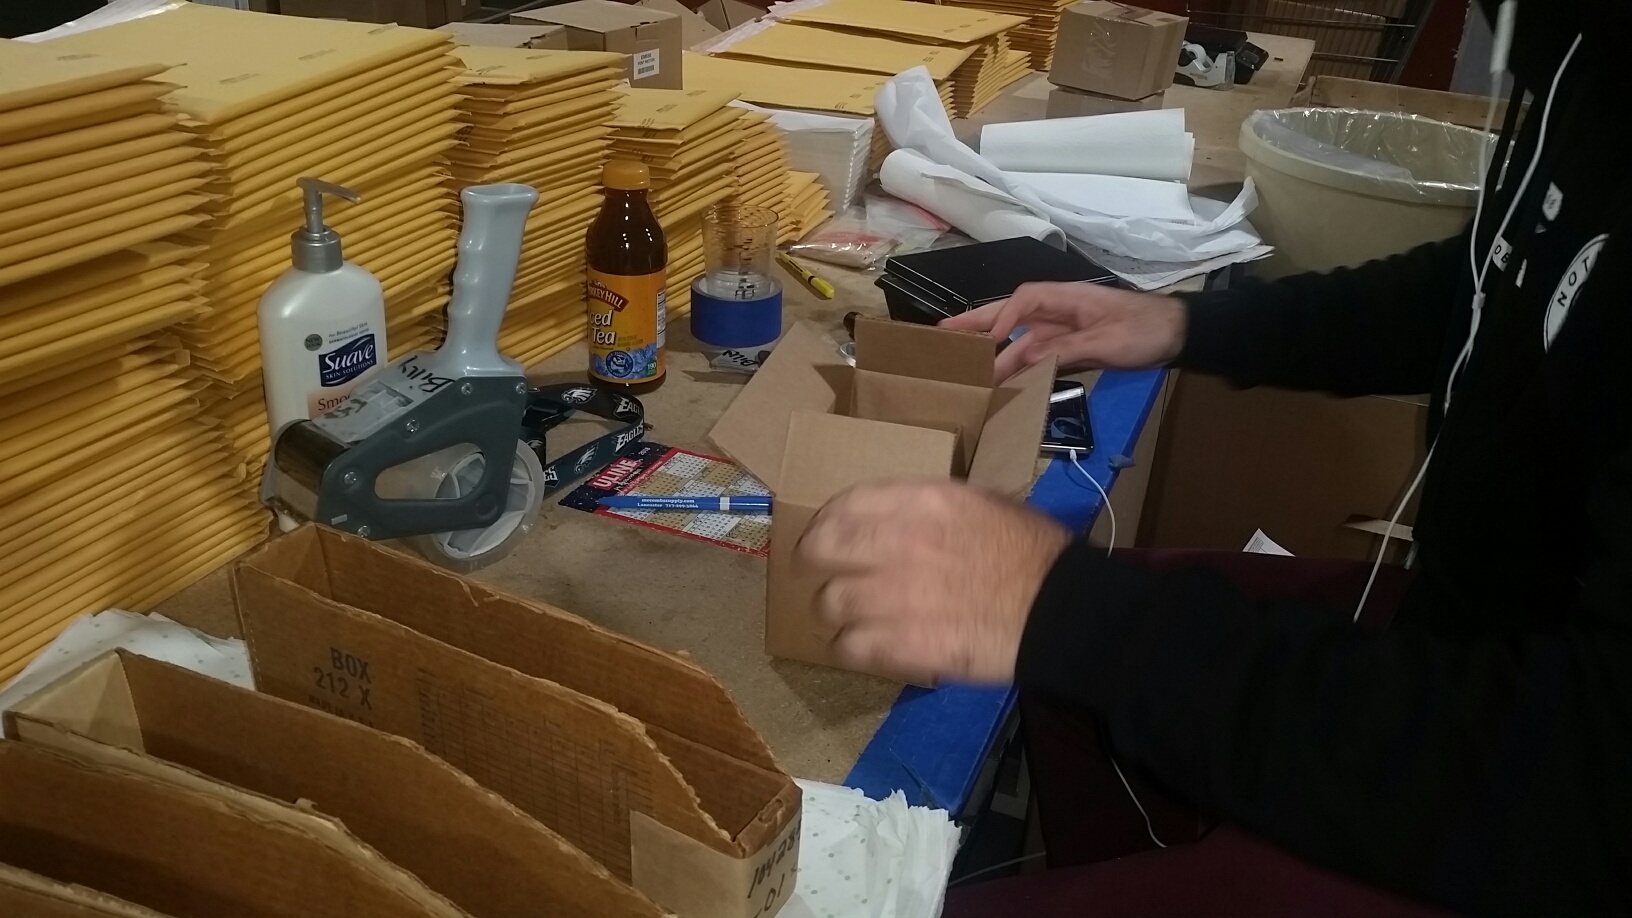 Packaging parts for shipping